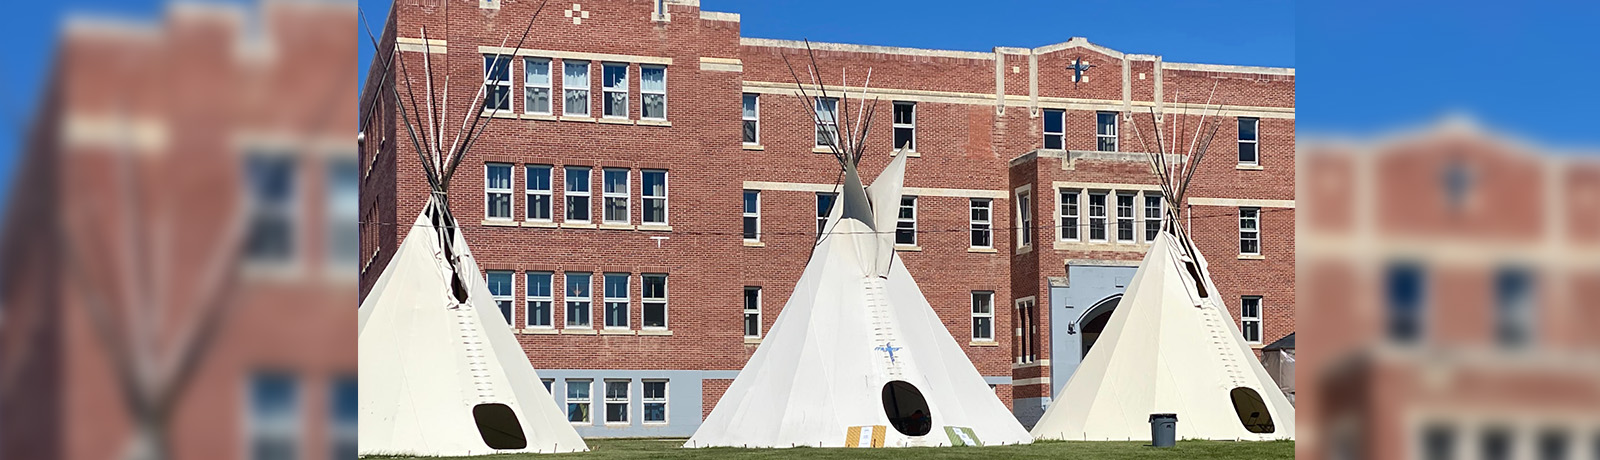 Three tipis stand outside the former Blue Quills Indian Residential School